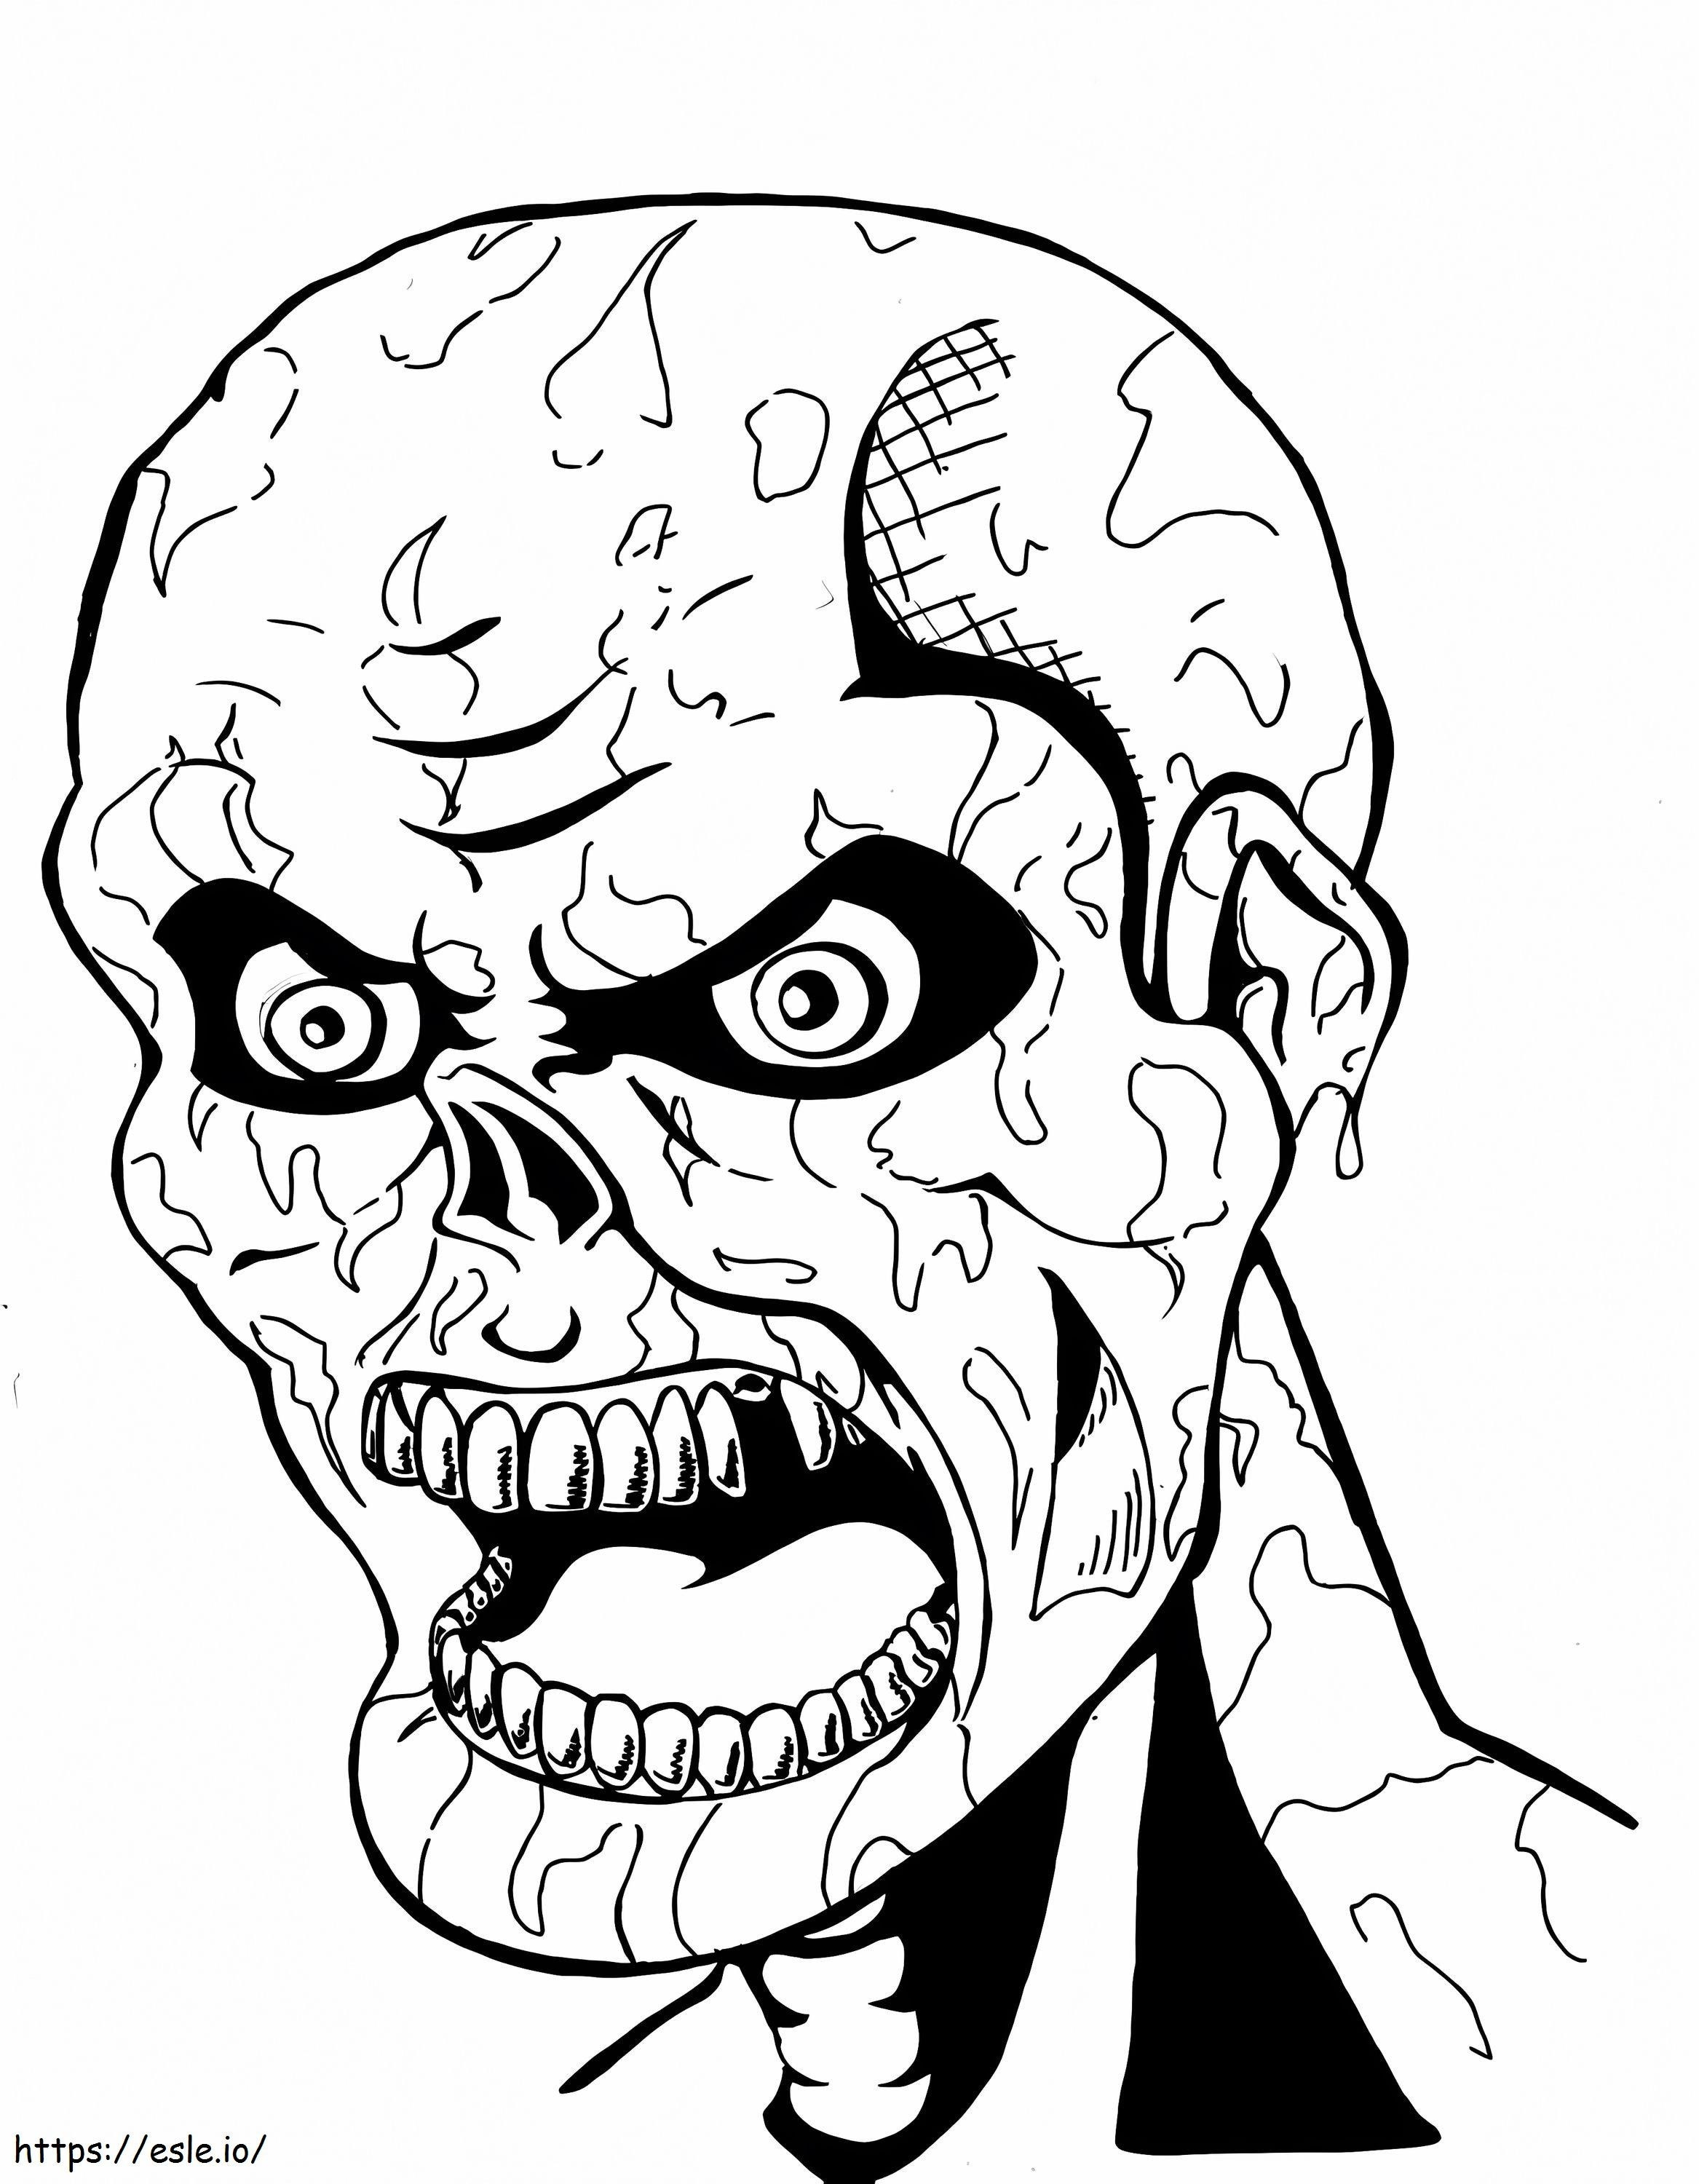 Scary Zombie Horror coloring page